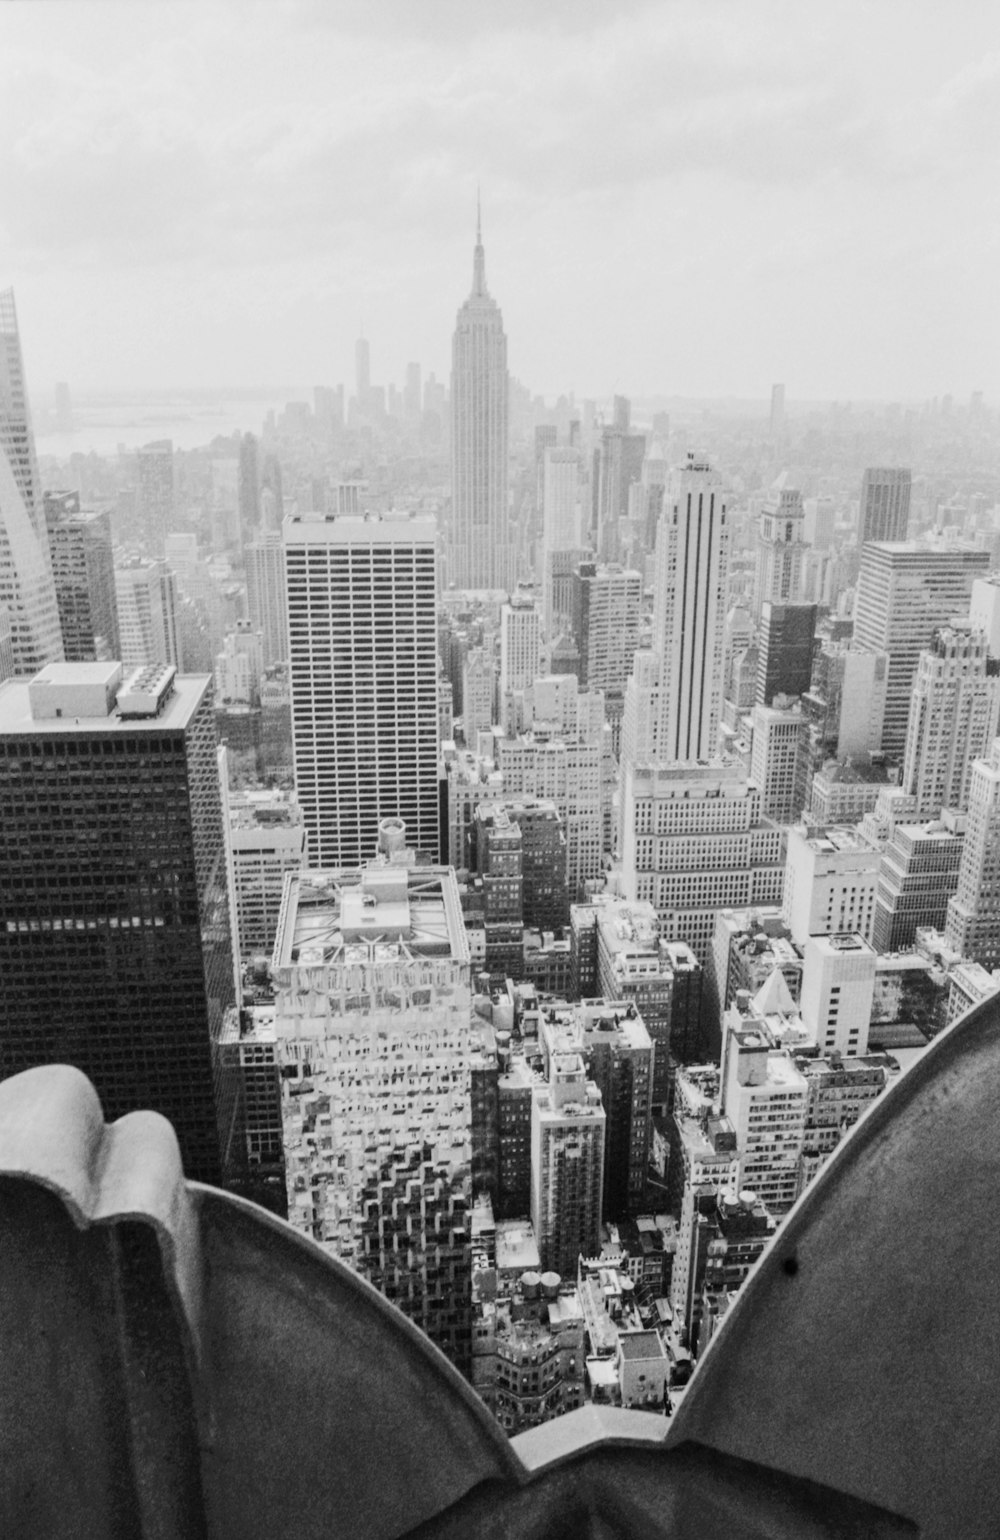 a view from the top of a skyscraper in new york city